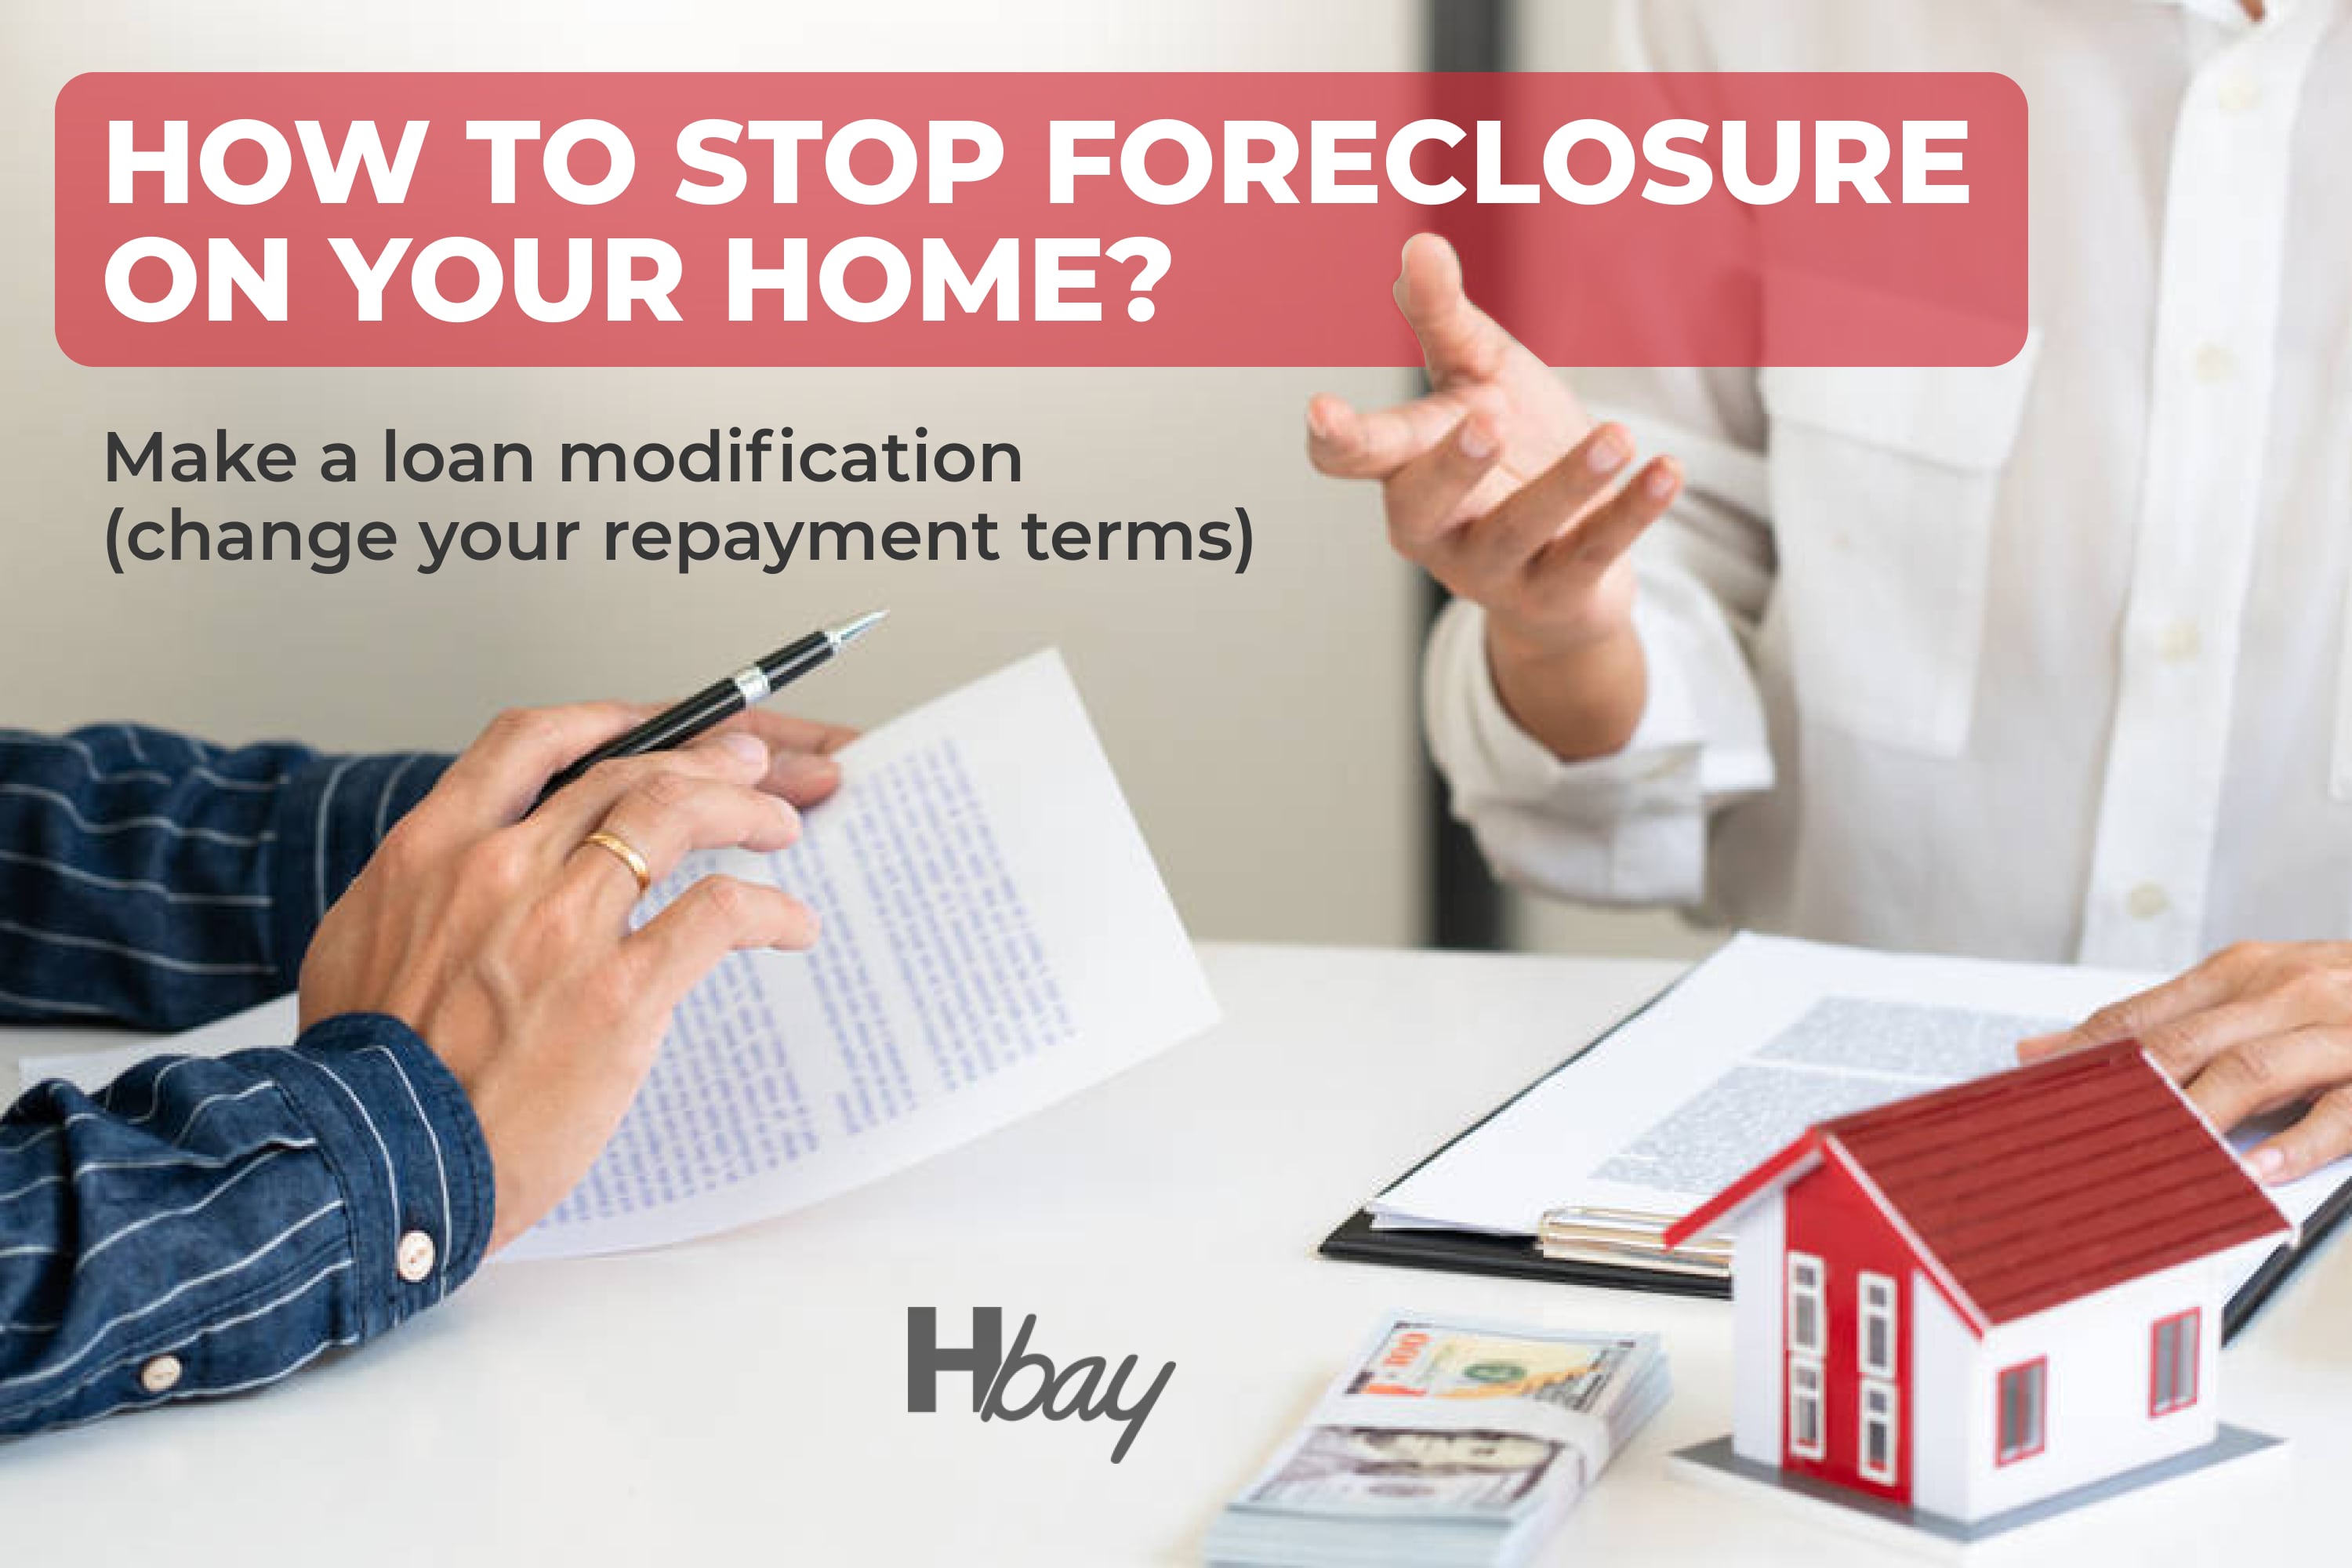 How to stop foreclosure on your home